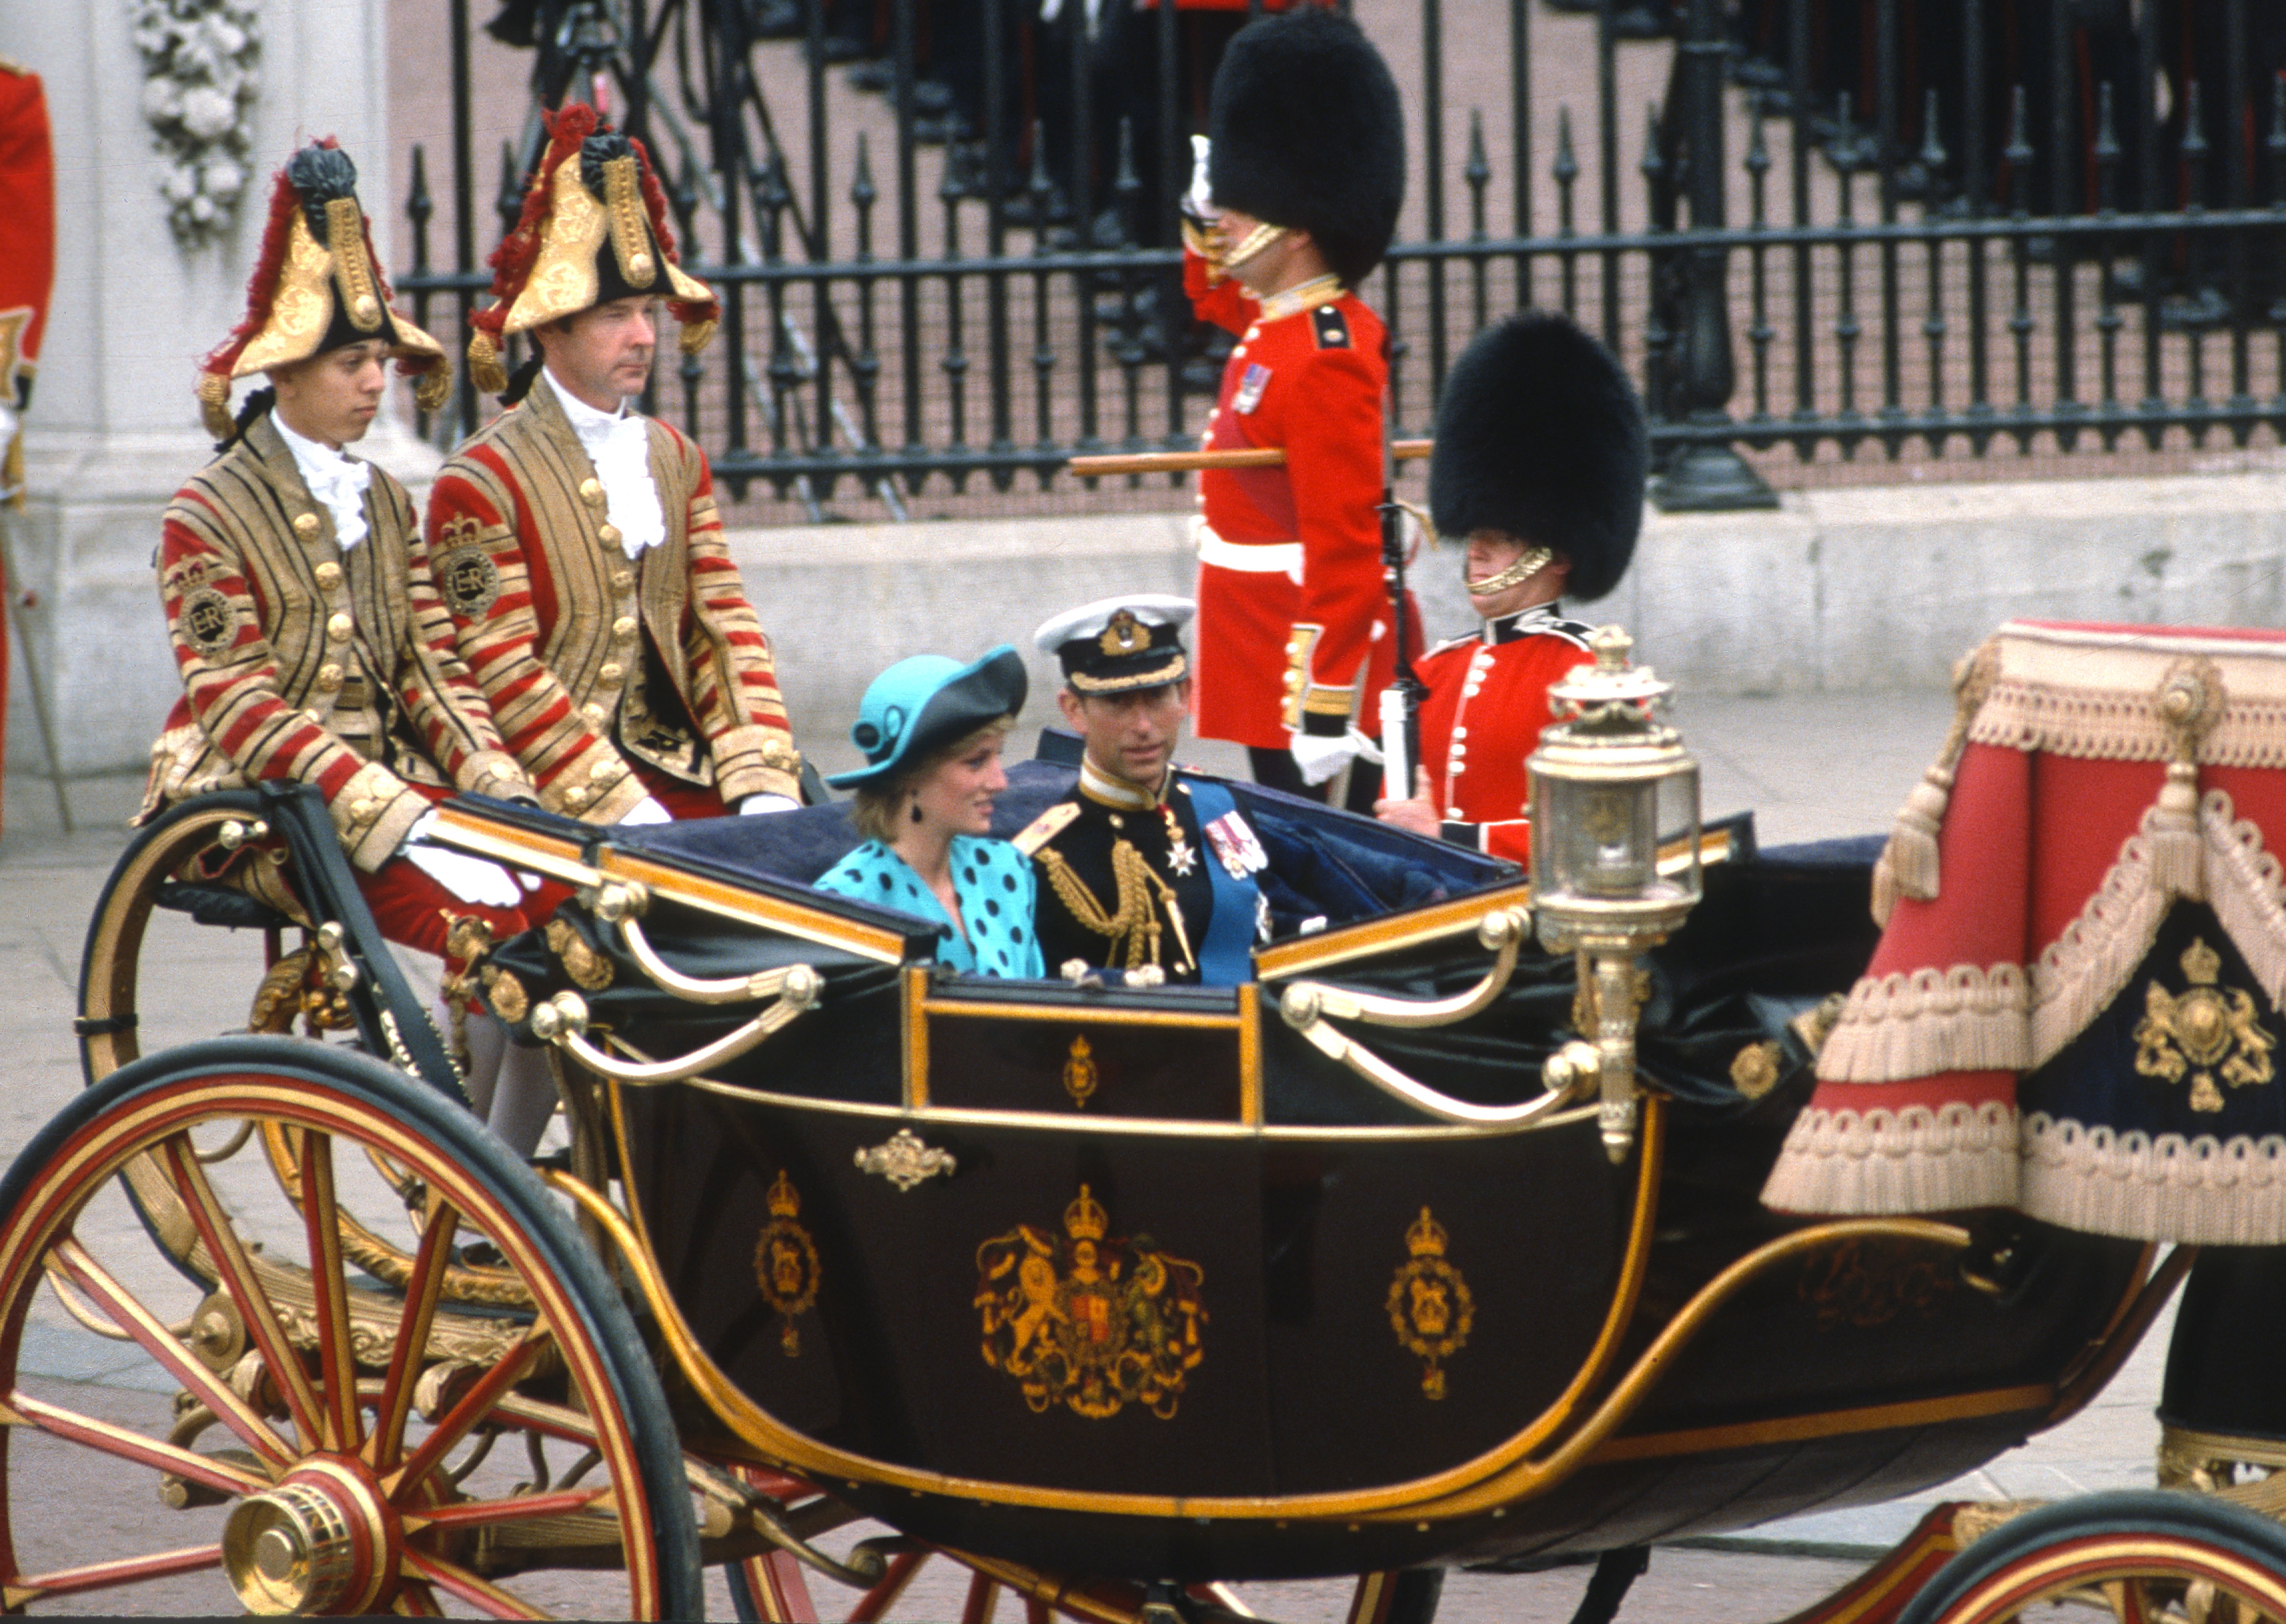 Diana, Princess of Wales and Charles, Prince of Wales pictured riding in an open carriage as they attend the wedding of Prince Andrew and Sarah Ferguson on July 23, 1986 in London, United Kingdom. / Source: Getty Images